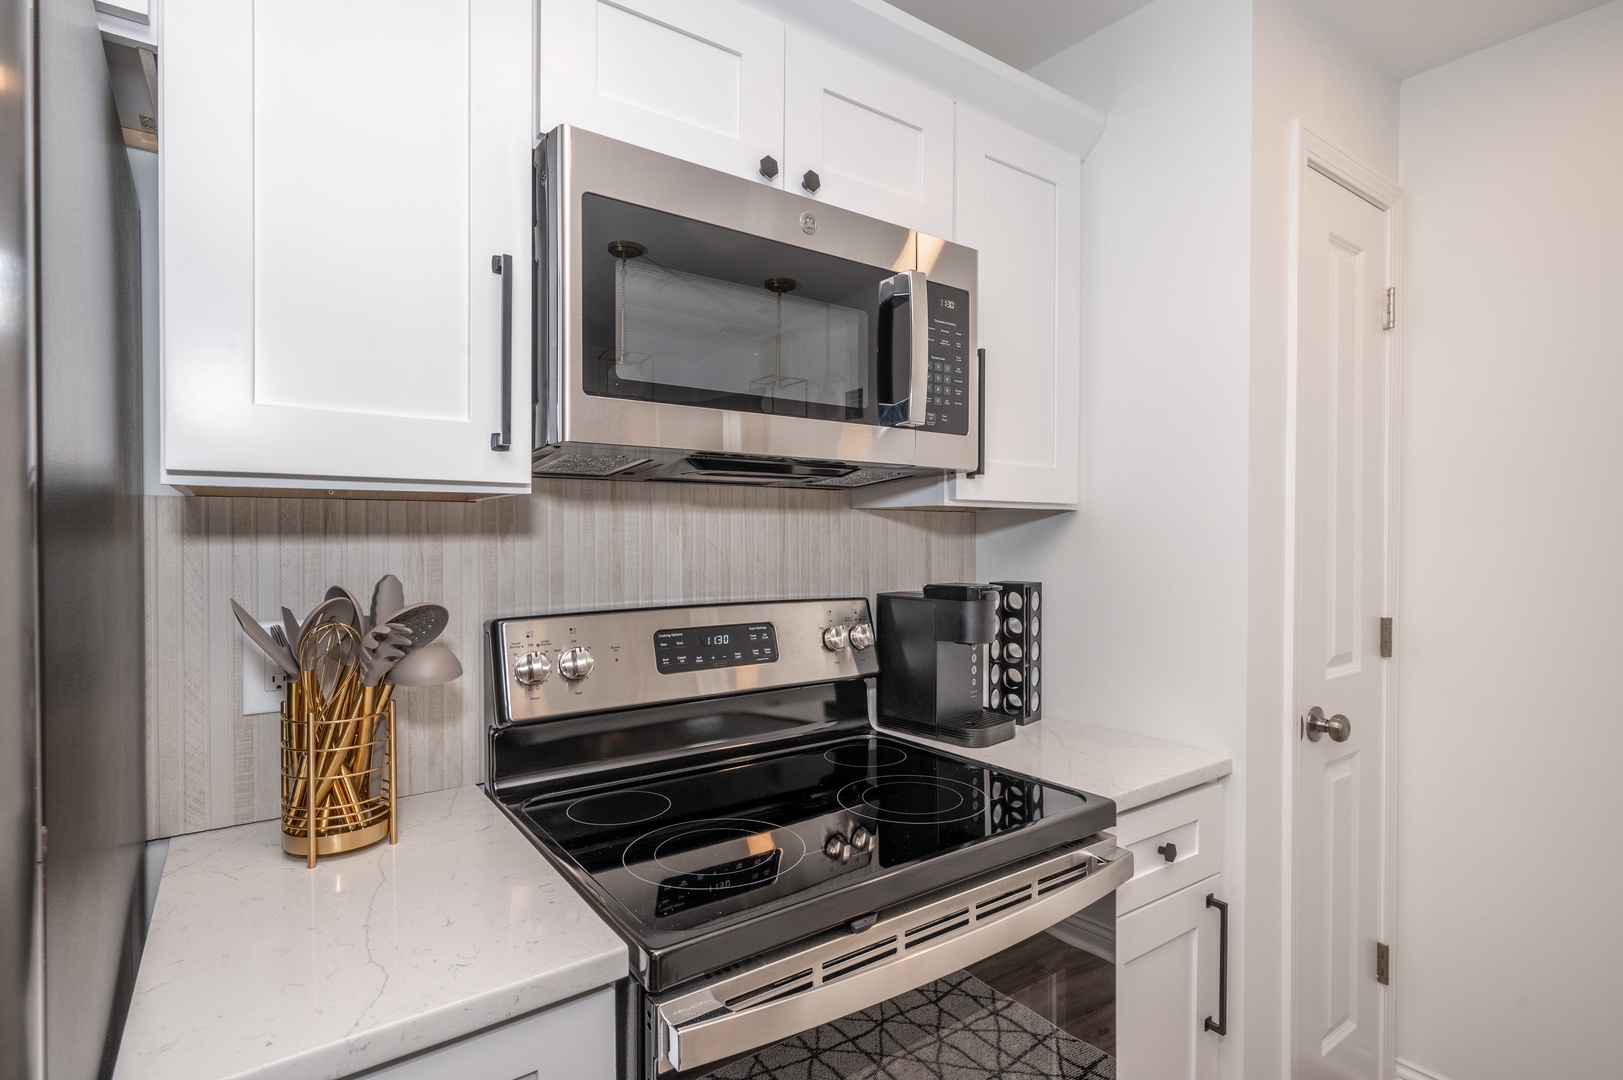 Unit 101: The fully-equipped kitchen offers tons of space & amenities